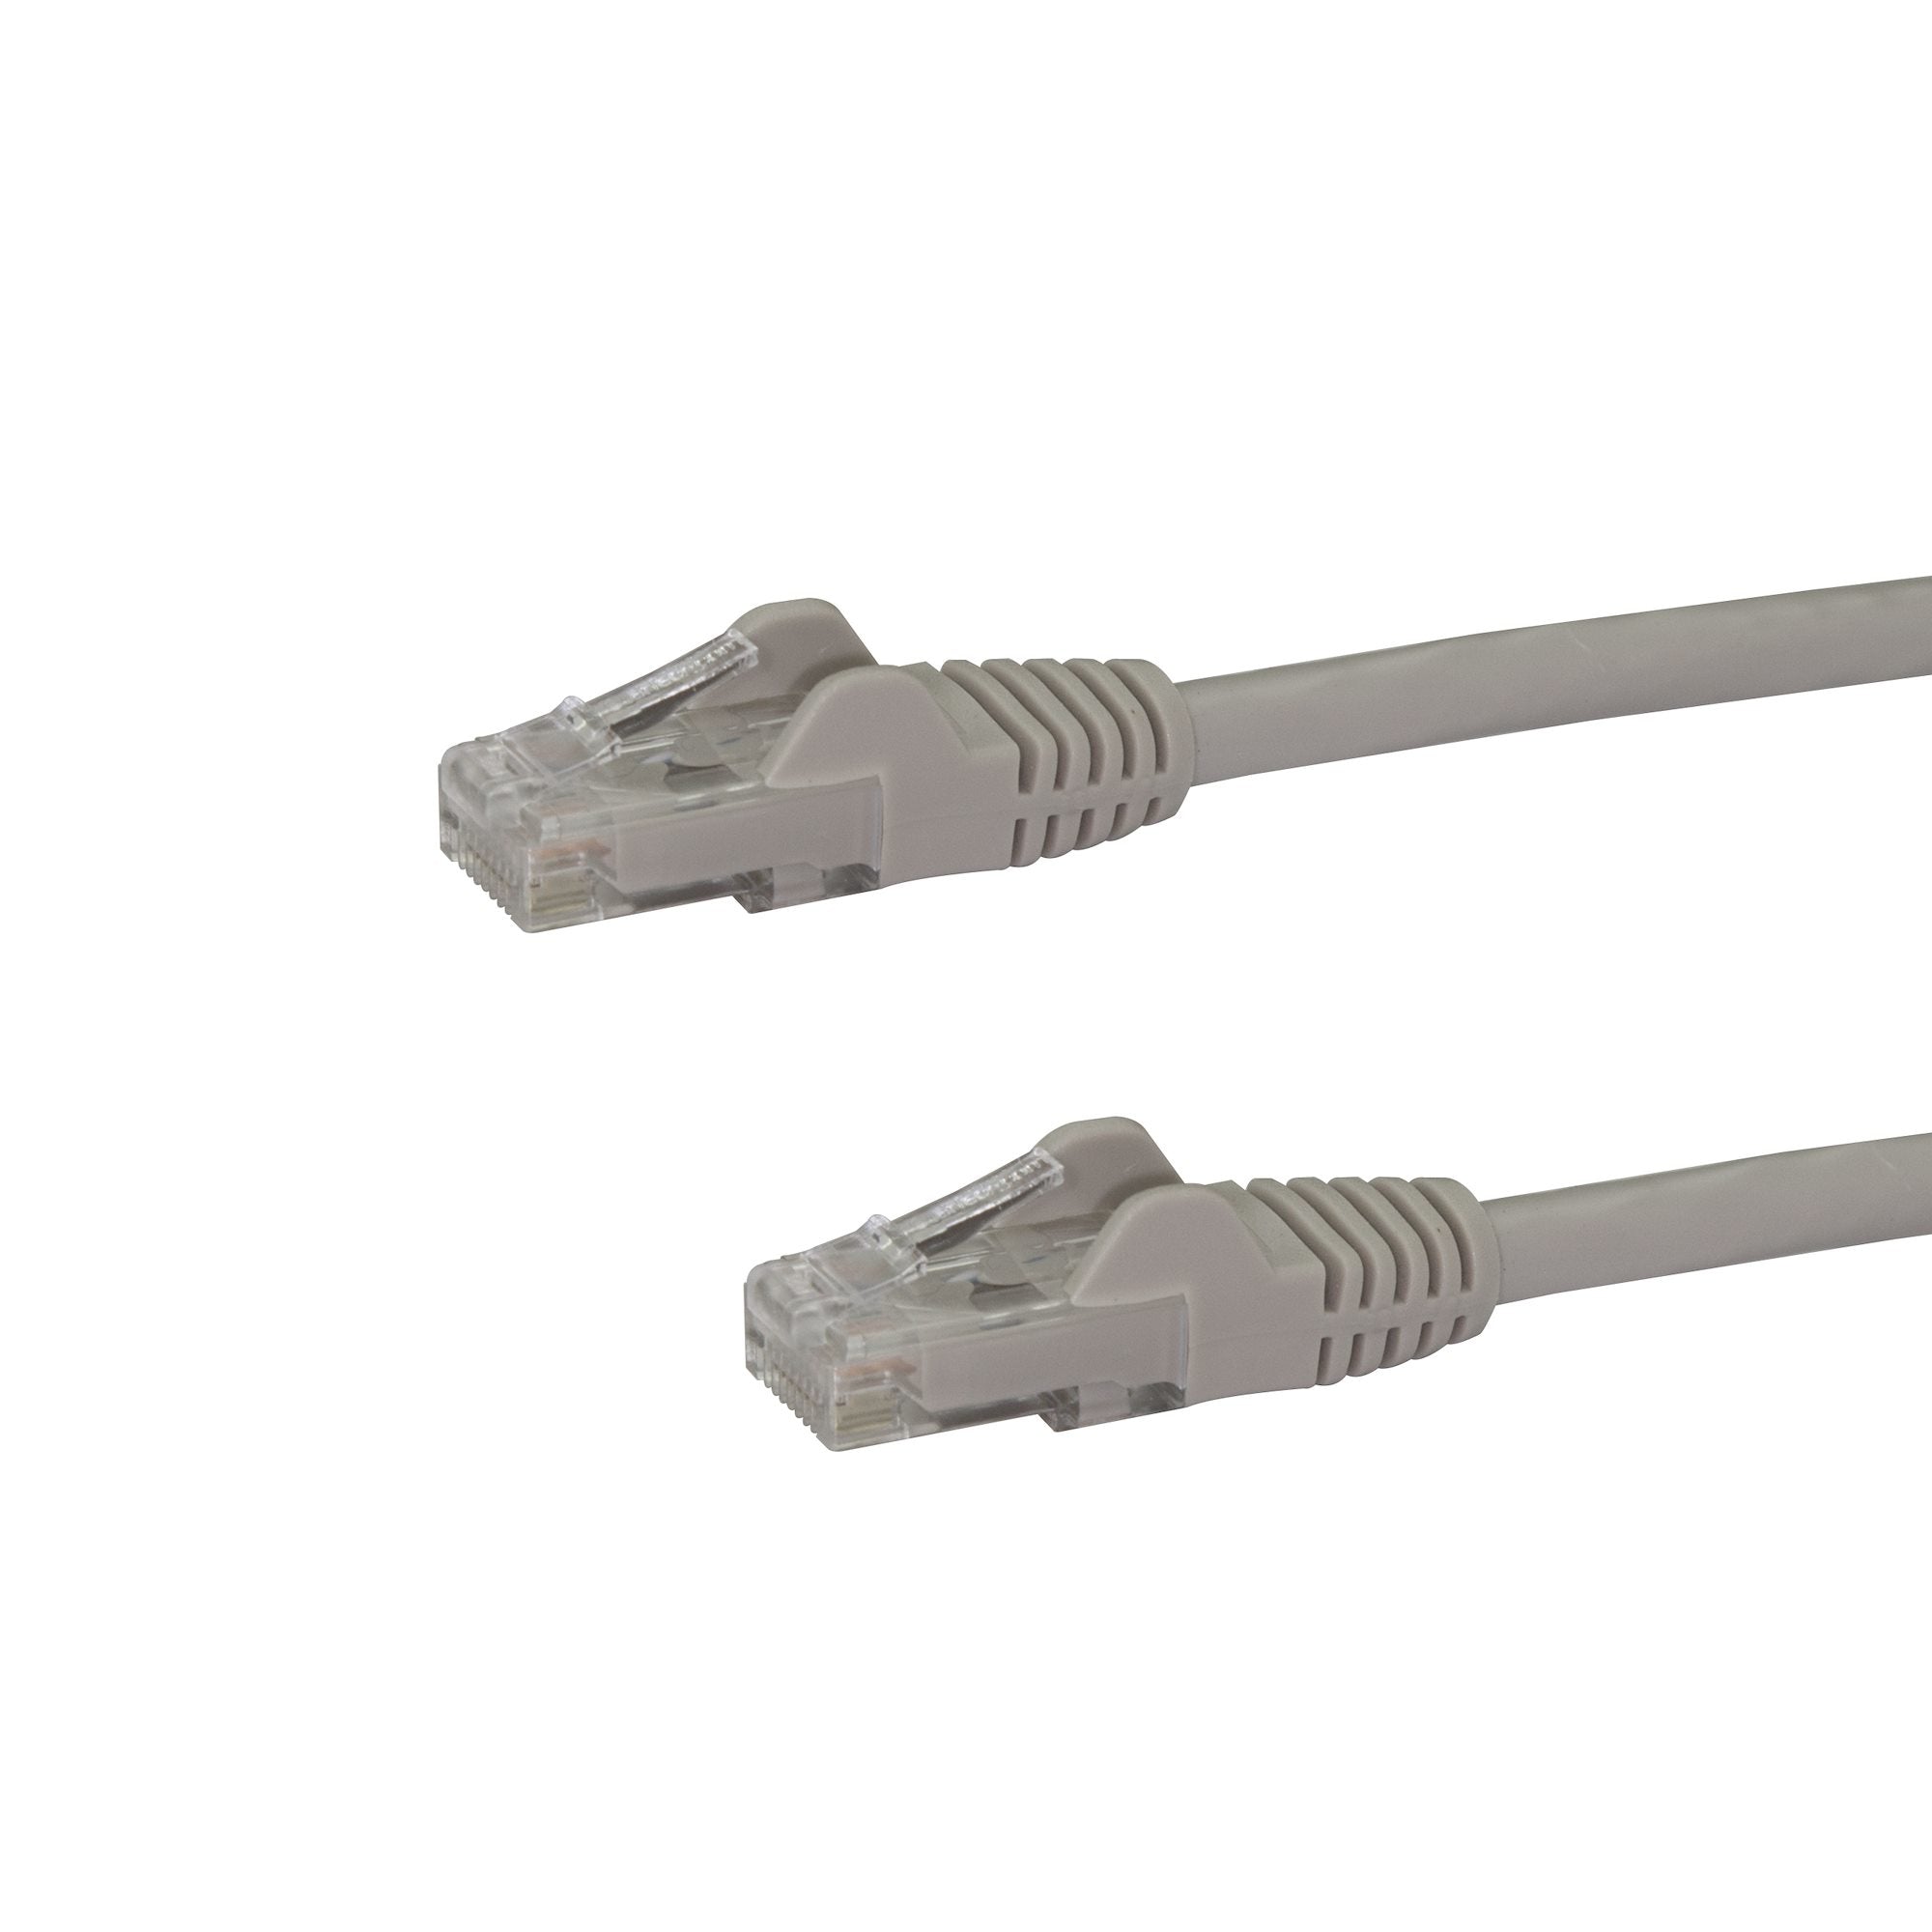 75ft CAT6 Ethernet Cable - Gray CAT 6 Gigabit Ethernet Wire -650MHz 100W PoE RJ45 UTP Network/Patch Cord Snagless w/Strain Relief Fluke Tested/Wiring is UL Certified/TIA